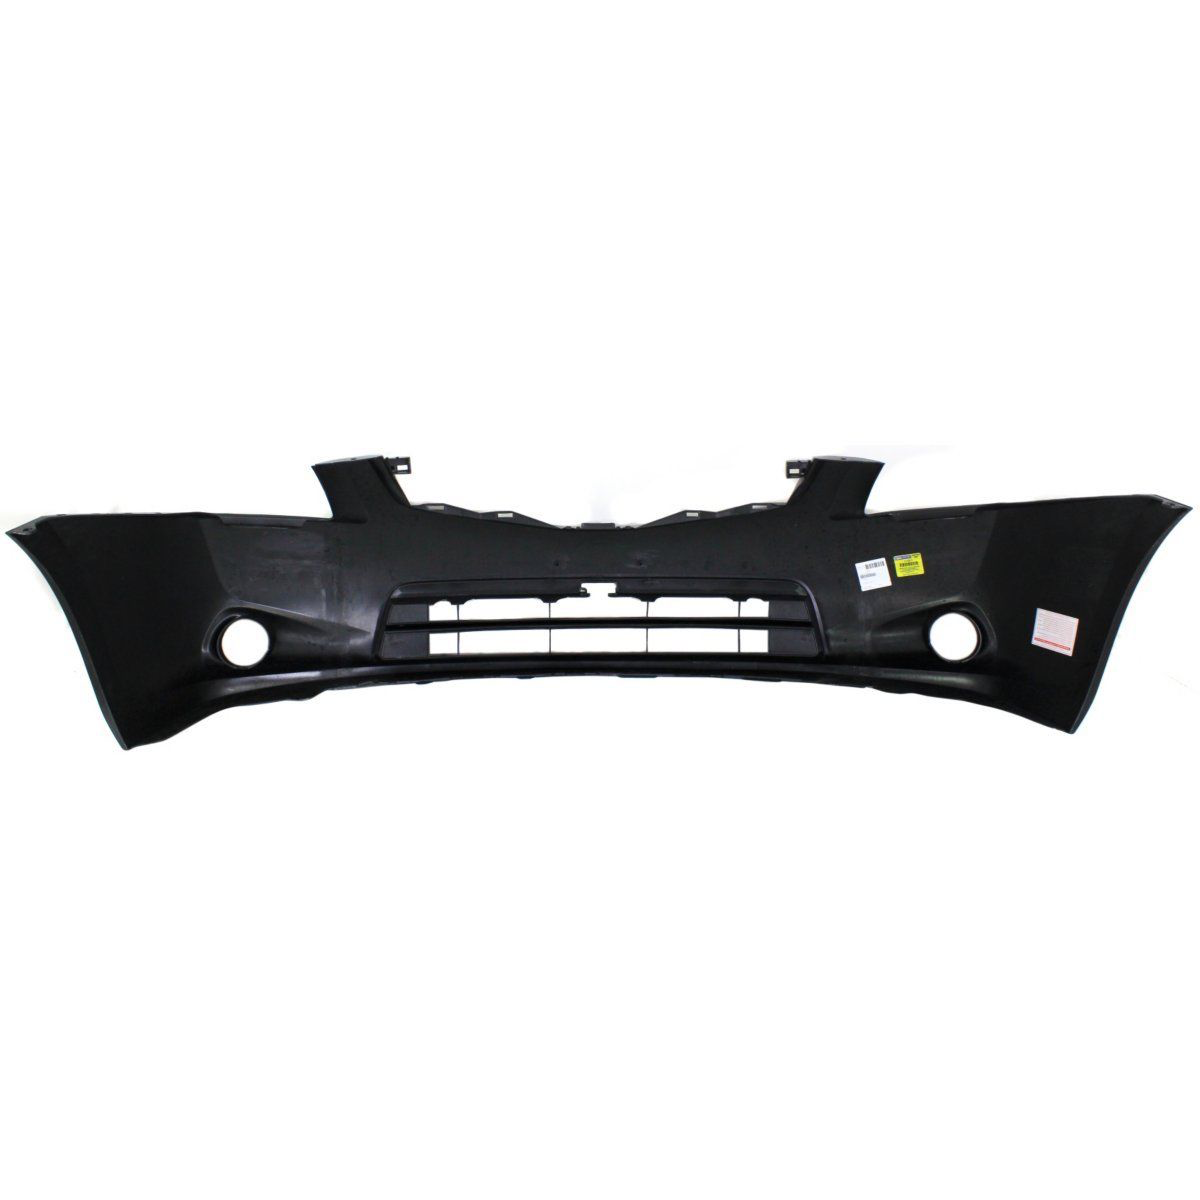 2010-2012 NISSAN SENTRA Front Bumper Cover SL Painted to Match